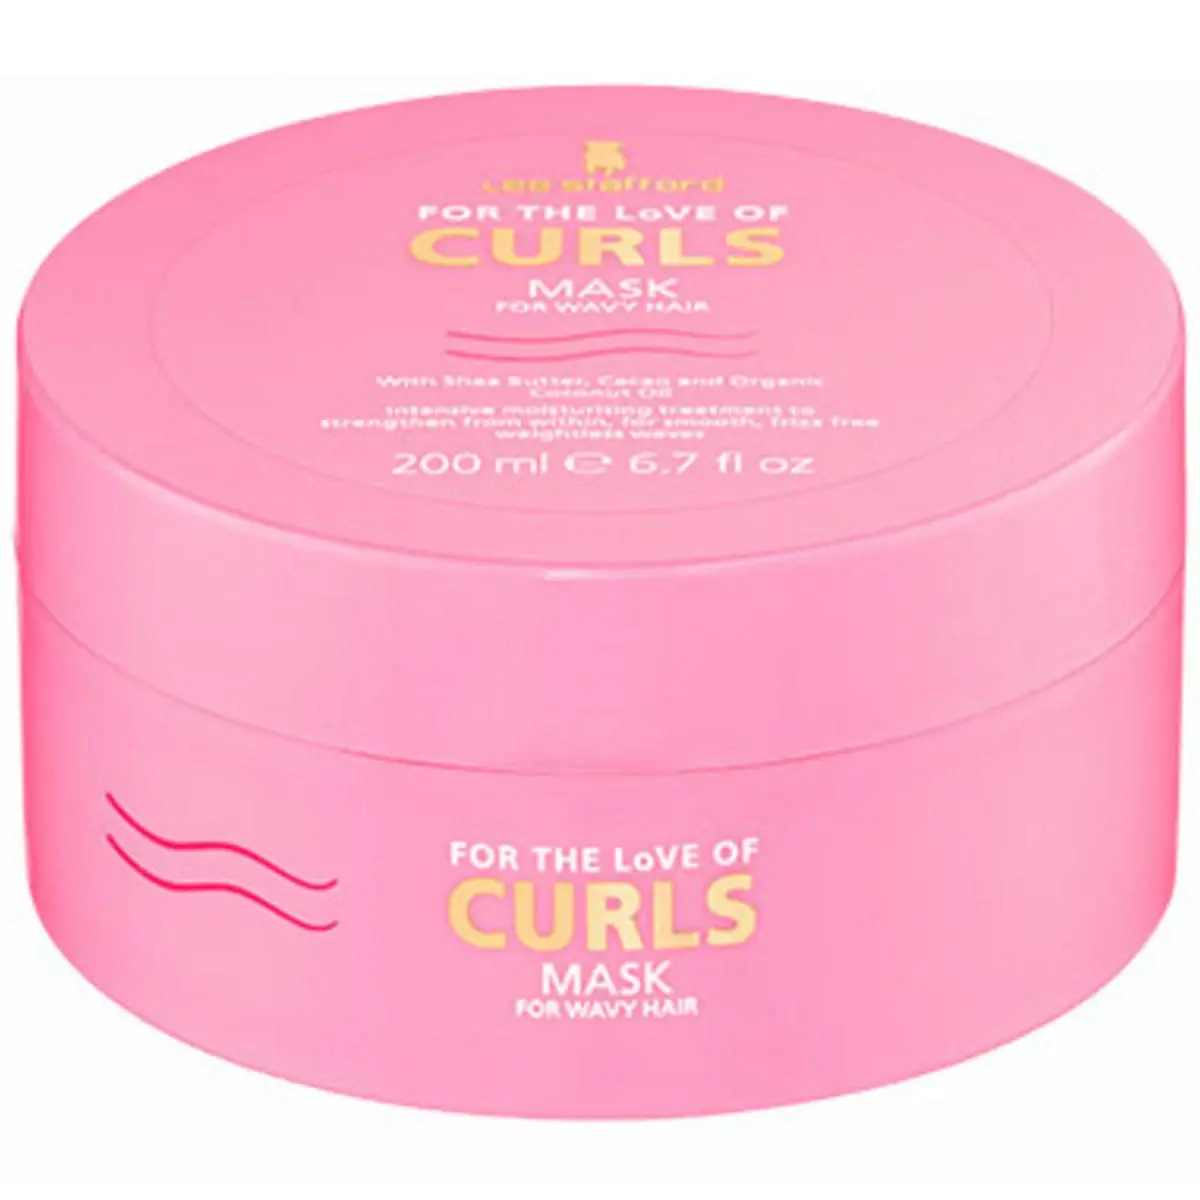 Lee Stafford for The Love of Curls Mask for Waves 200ml